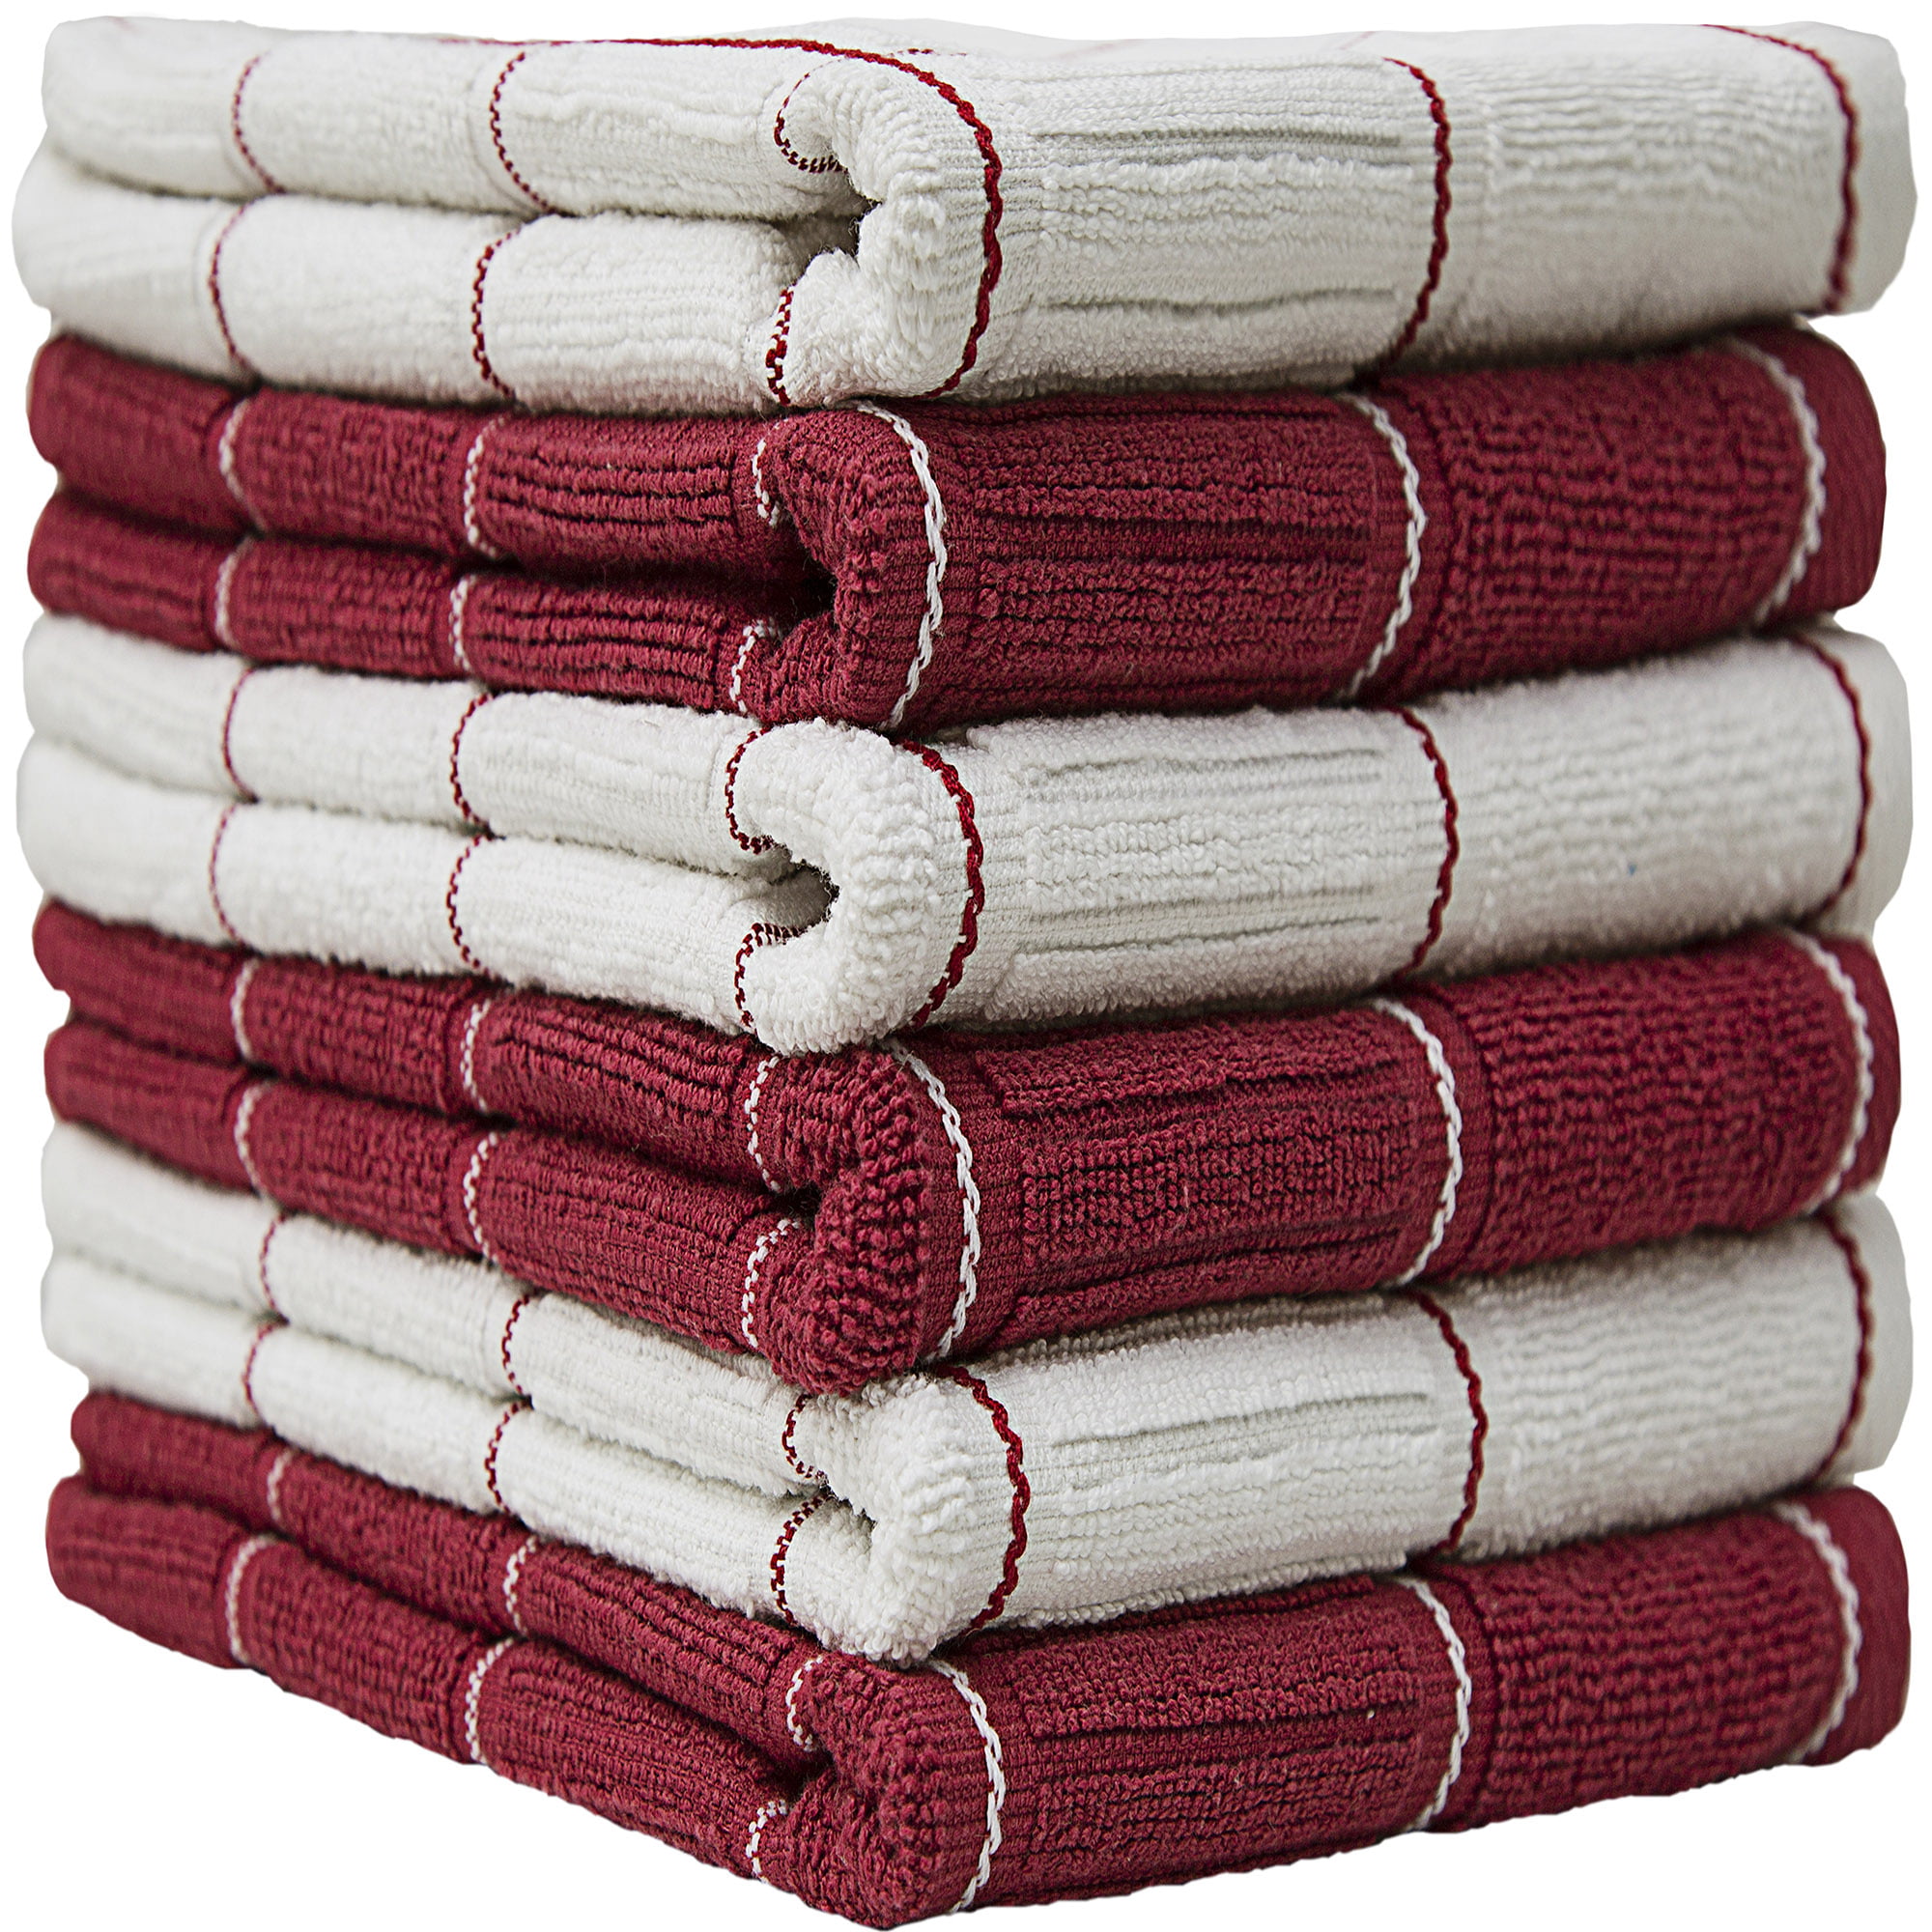 RIANGI Red Kitchen Towels - Set of 6 Cotton Dish Towels, Cotton Washcloth,  16x26 Inch Terry Bar Hand Towels, Tea Towels for Kitchen, Essential Kitchen